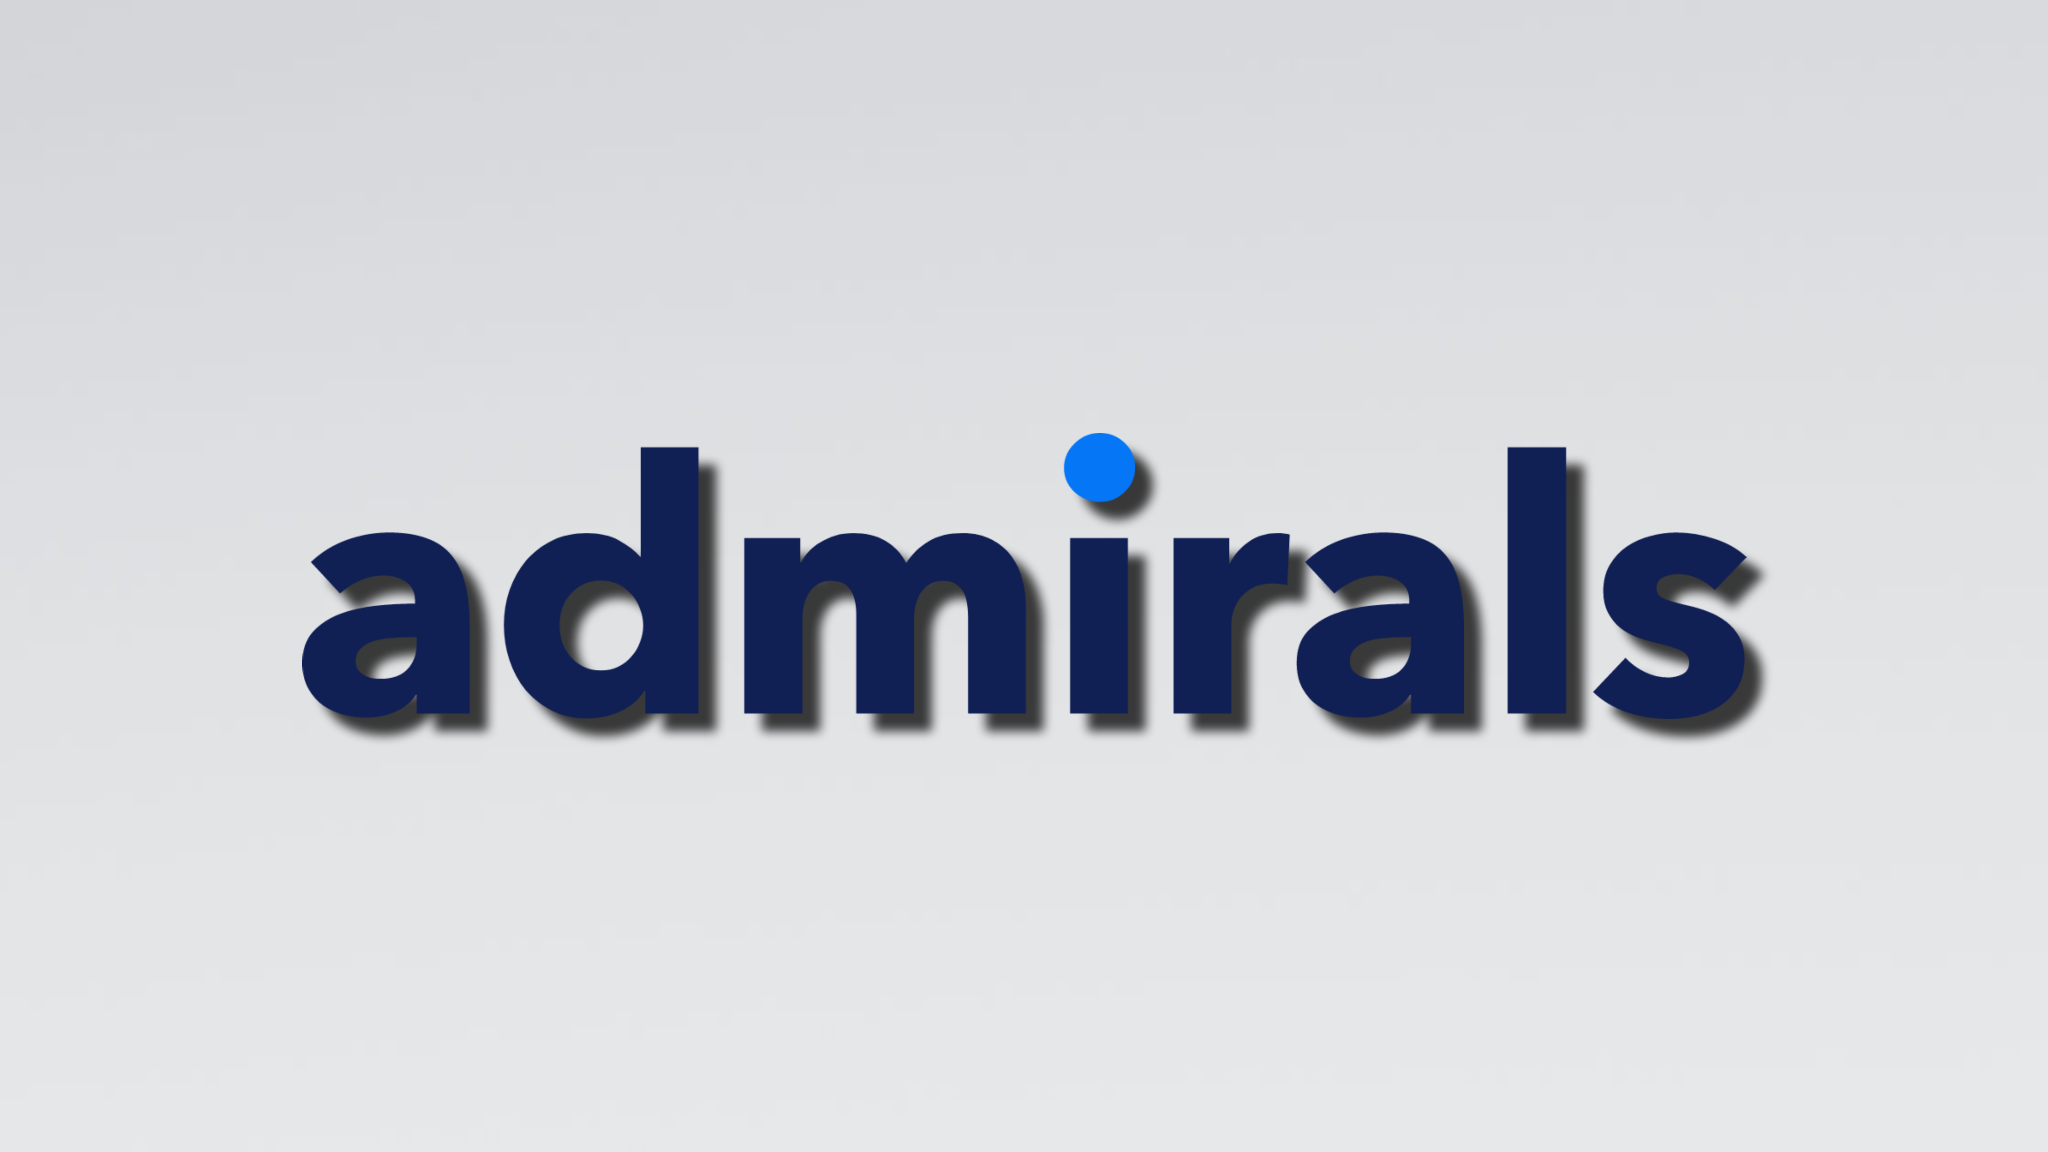 The retail broker Admirals has voluntarily suspended new client onboarding for its EU operations while implementing changes required to fully align its practices with CySEC's latest regulatory expectations.